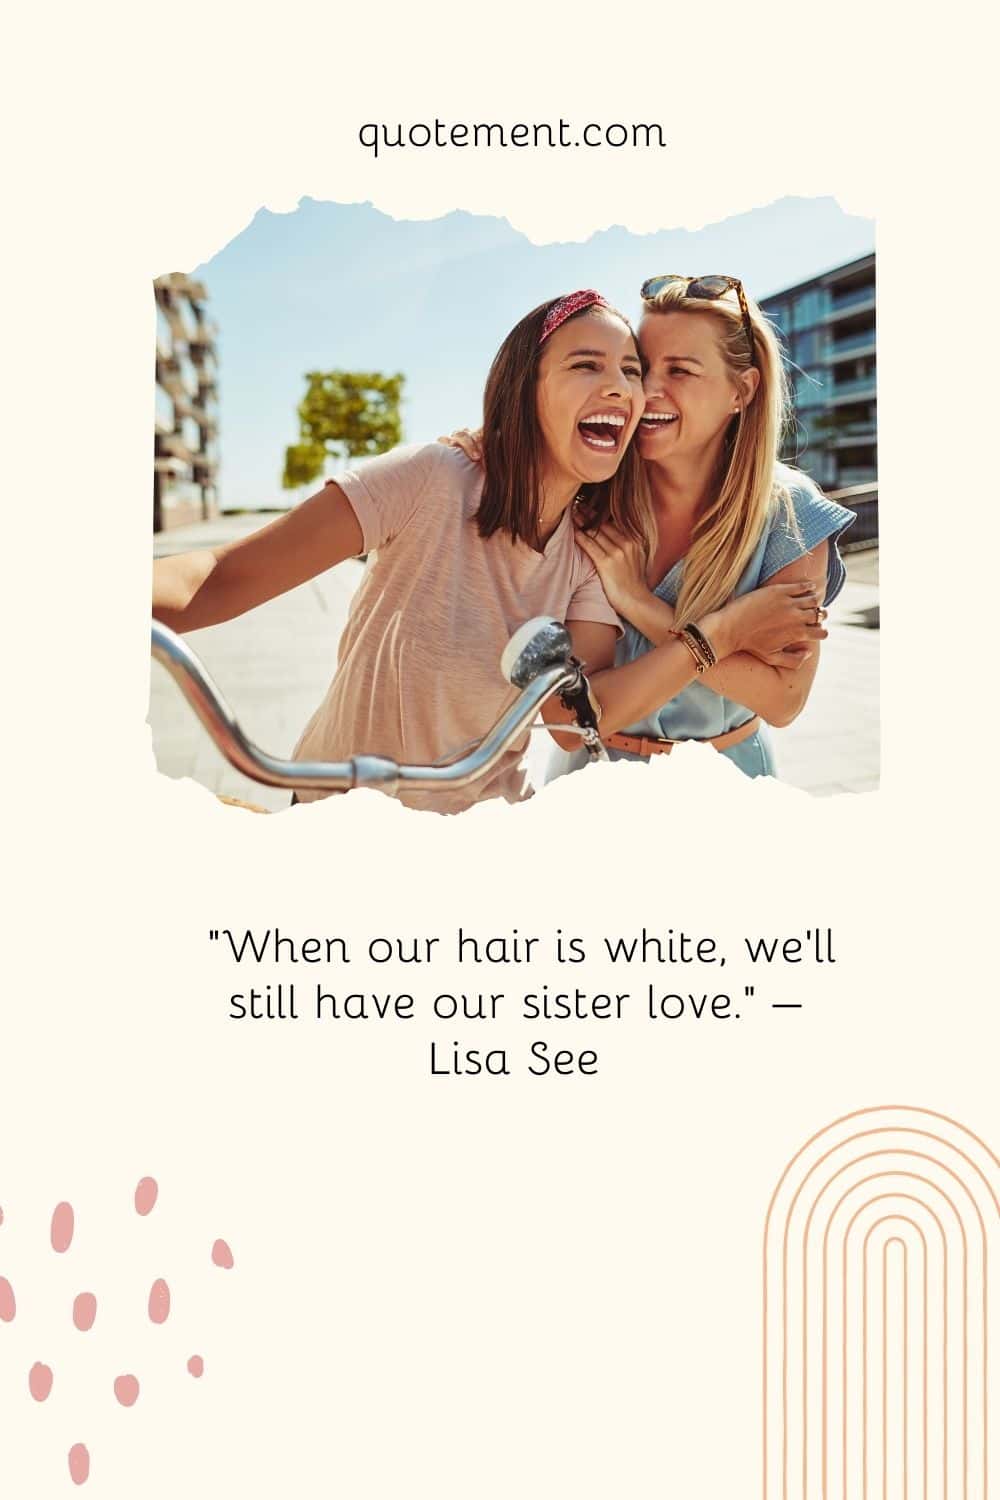 “When our hair is white, we’ll still have our sister love.” – Lisa See